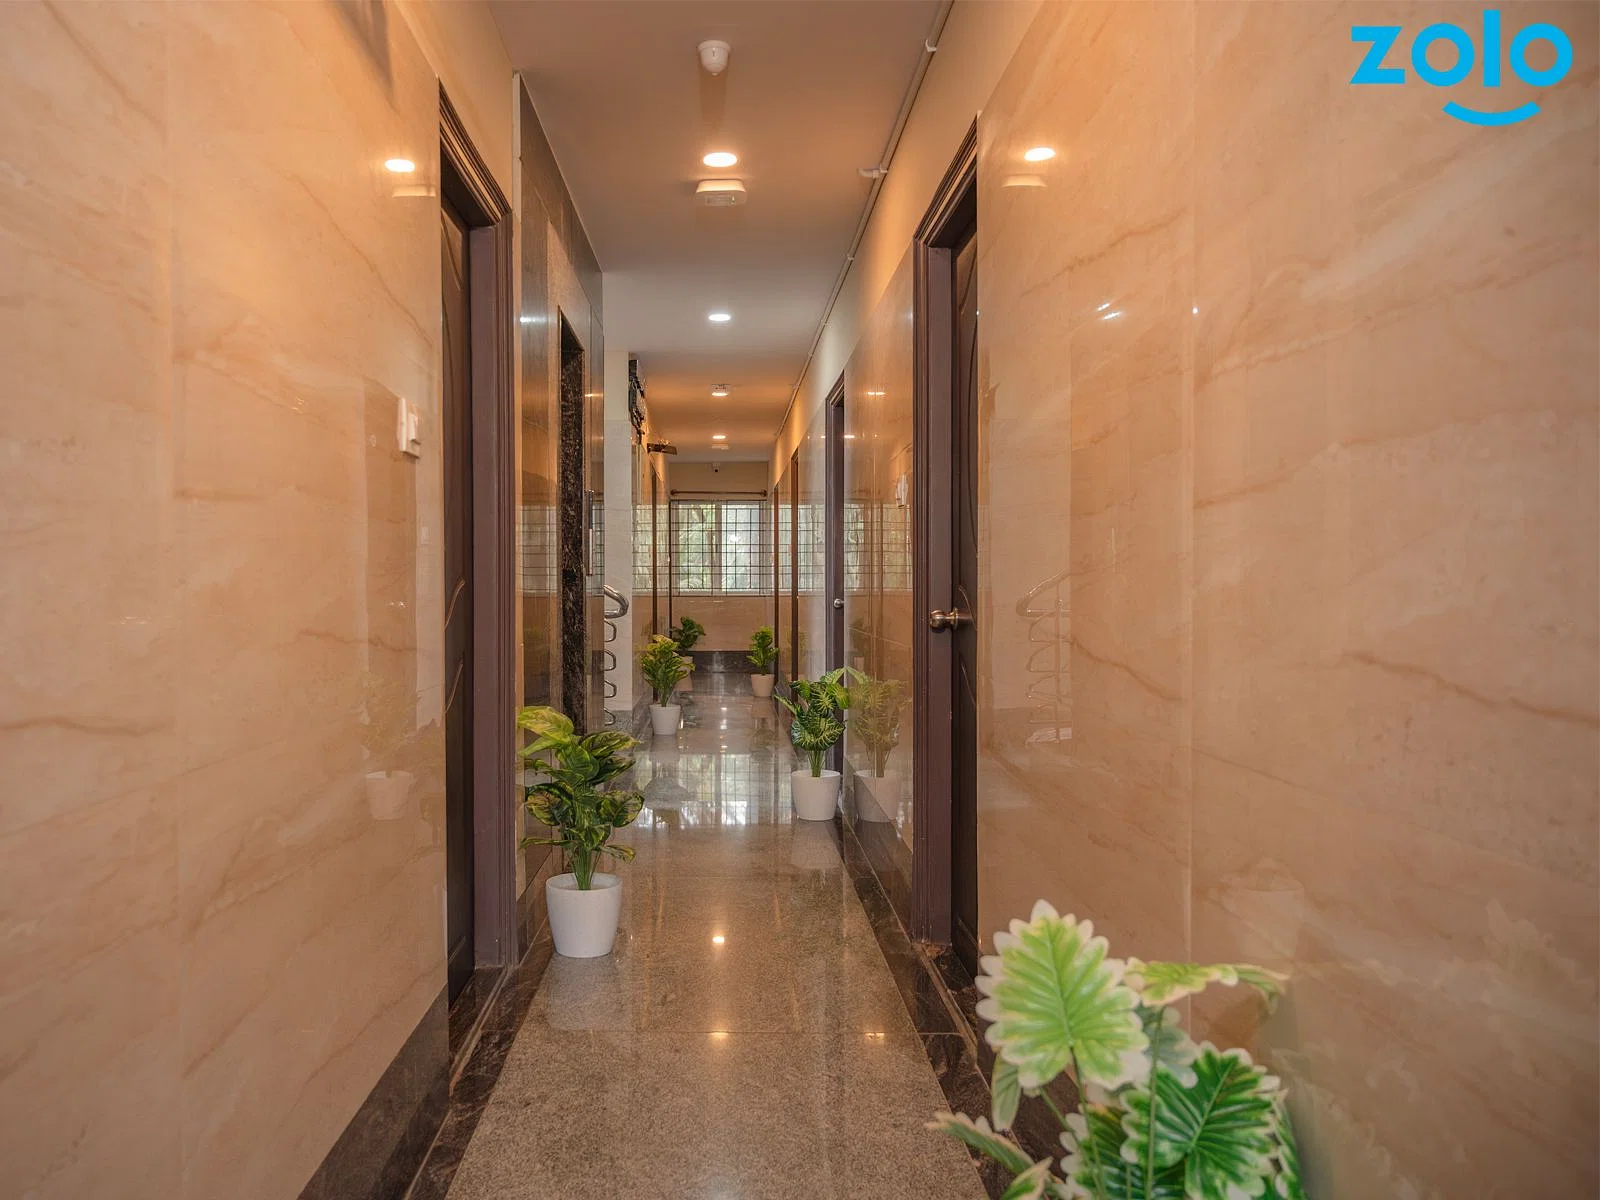 pgs in Koramangala with Daily housekeeping facilities and free Wi-Fi-Zolo Raptor